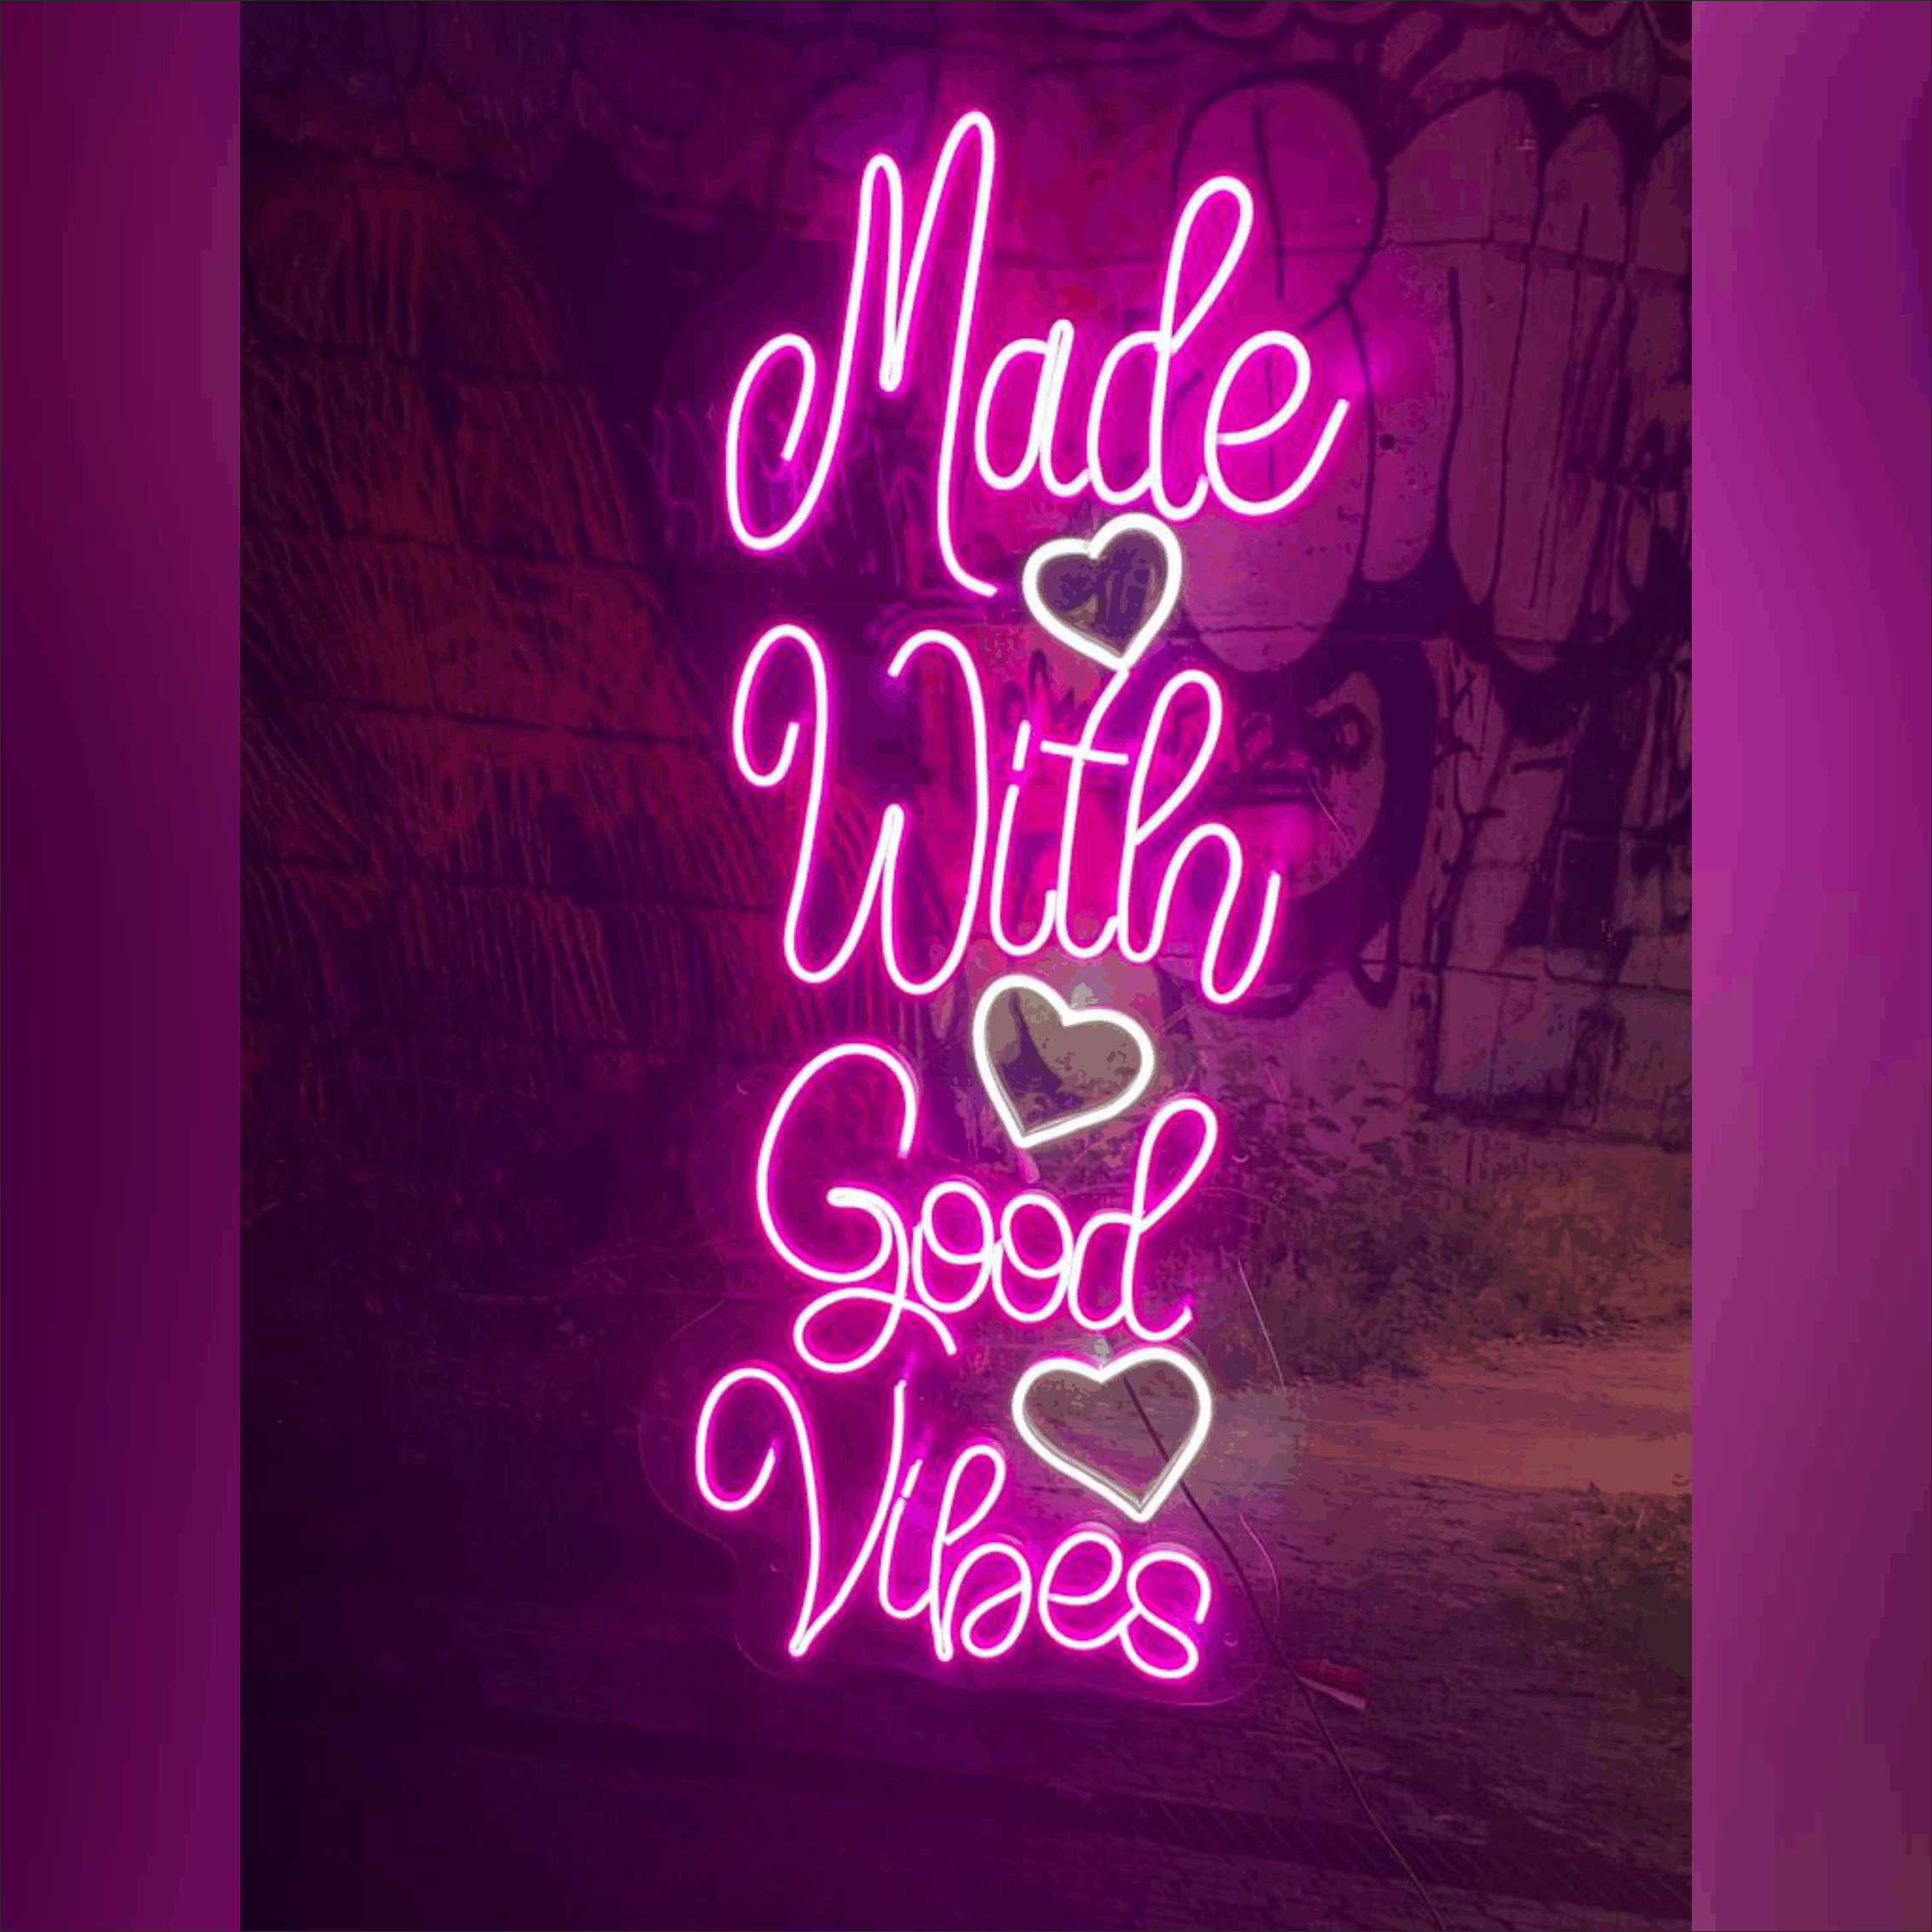 Made with good vibe neon sign